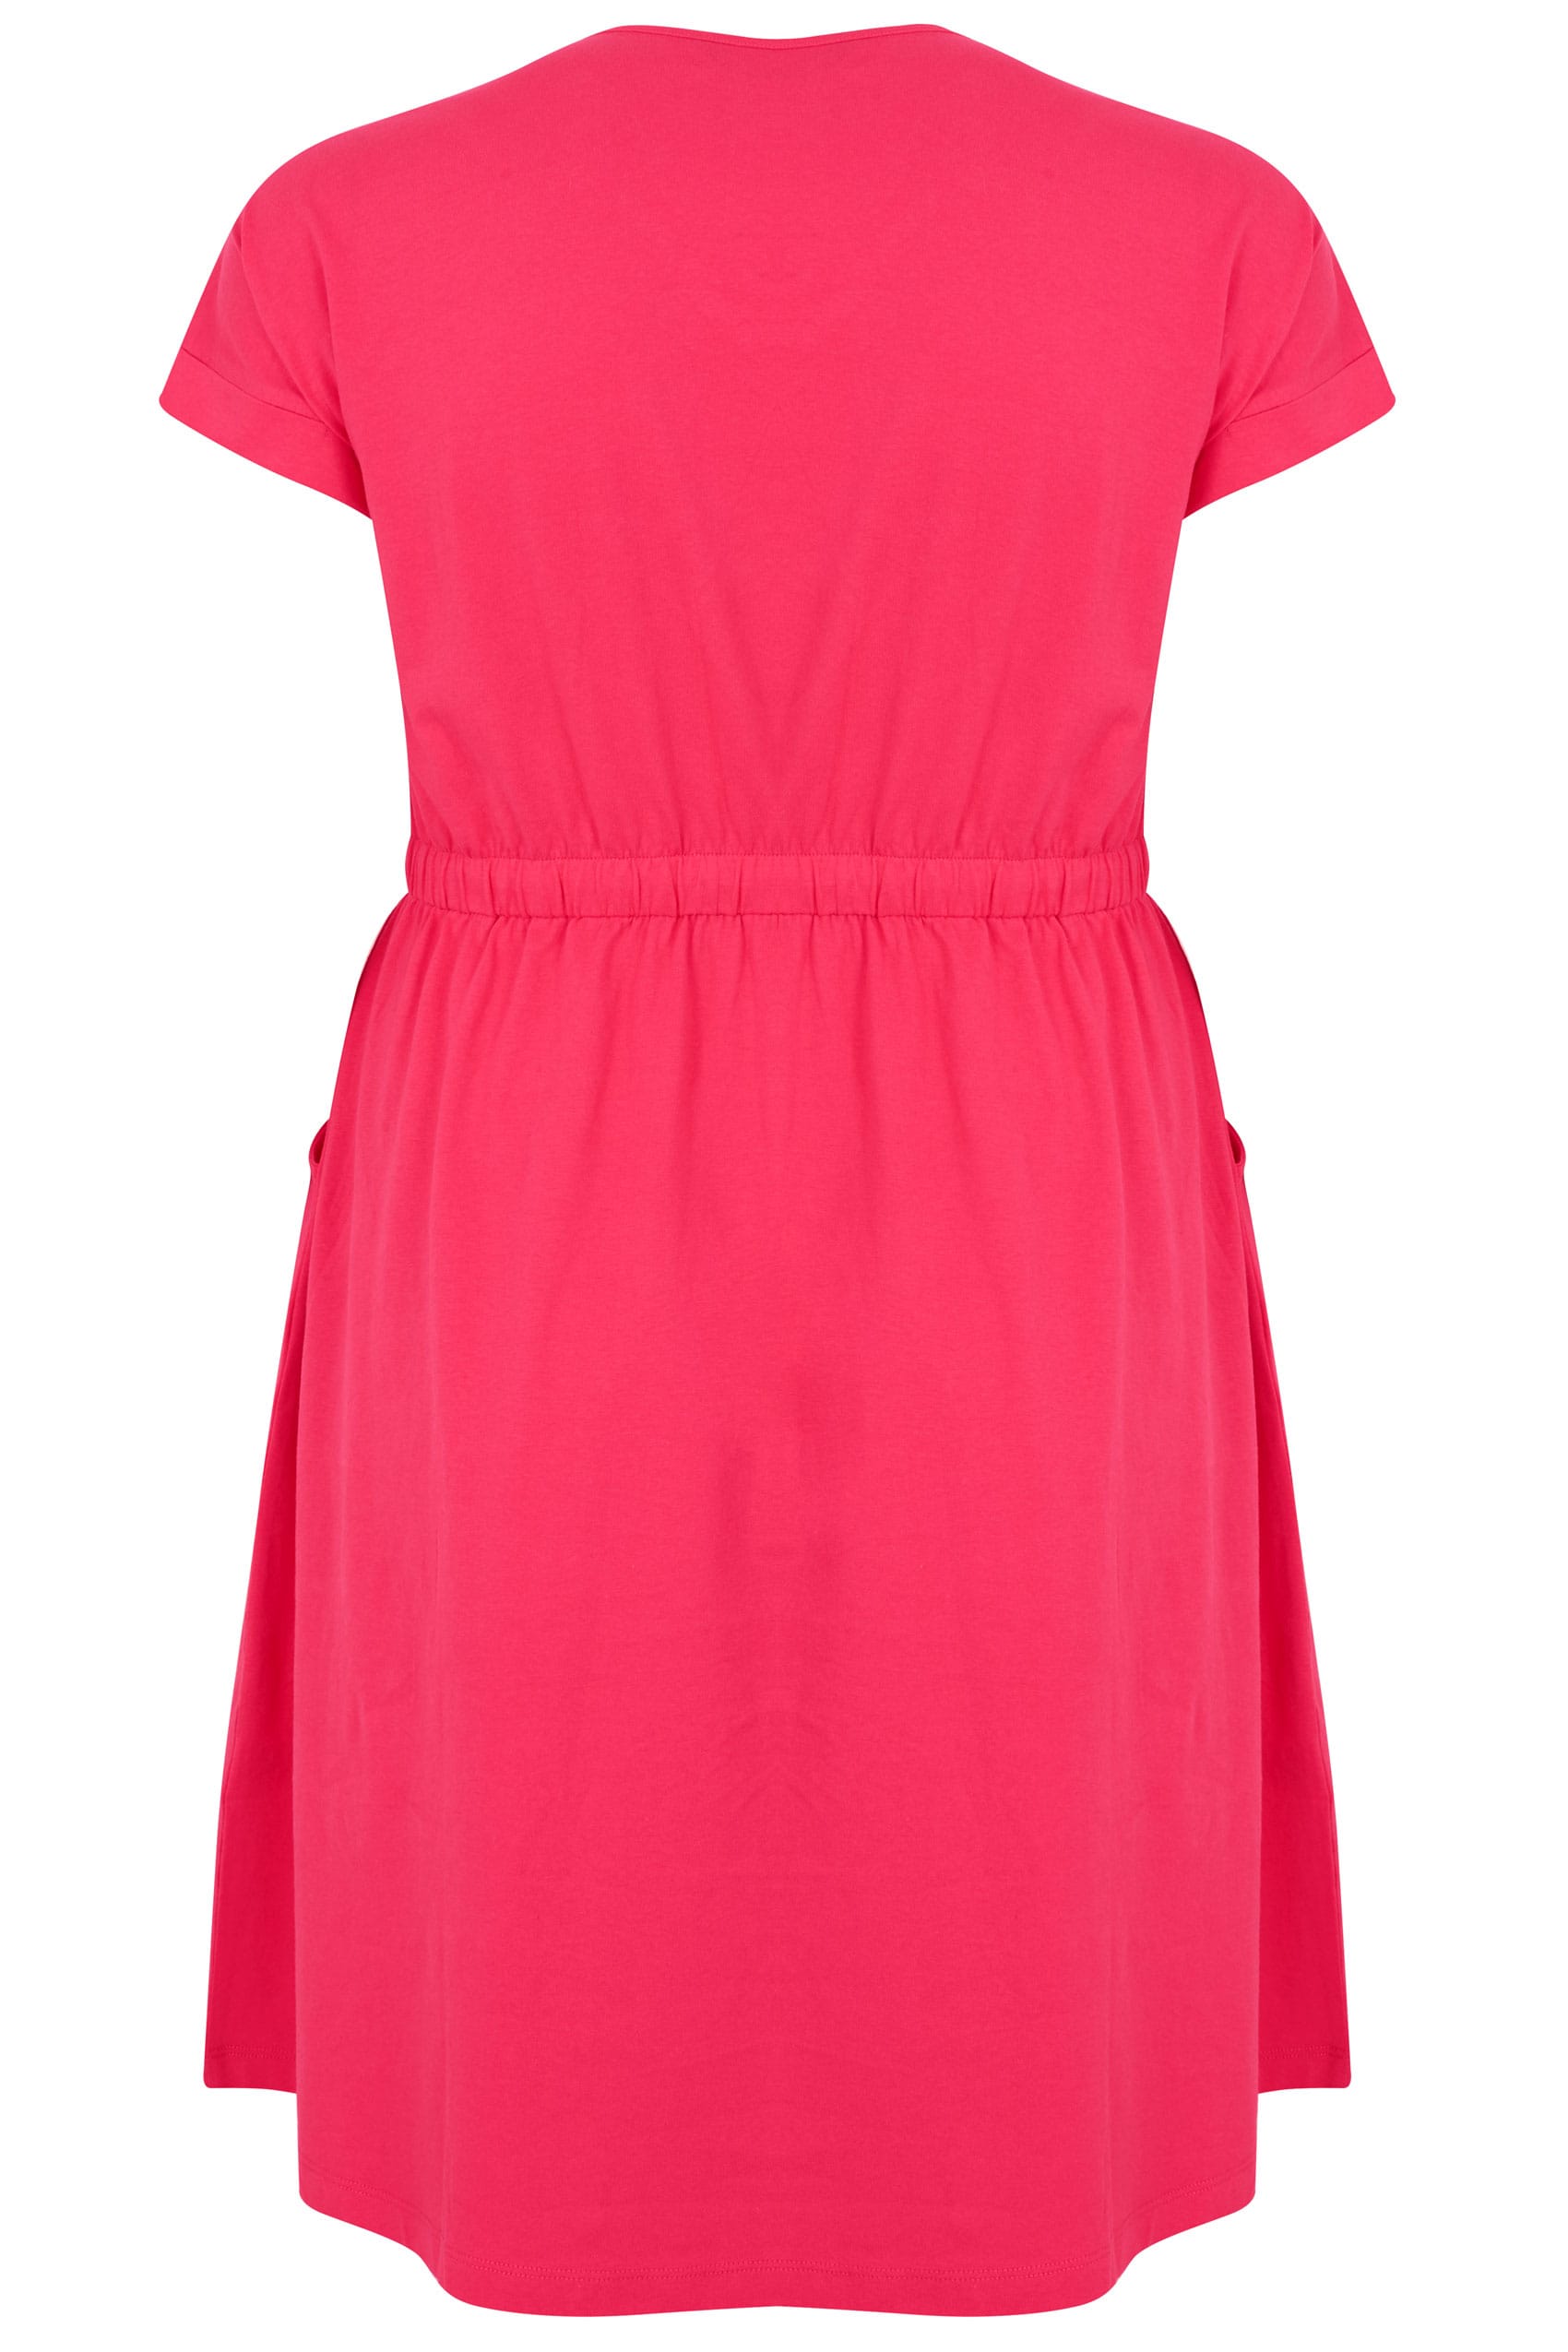 Bright Pink Jersey T-Shirt Dress With Drawstring Waist, plus size 16 to 36